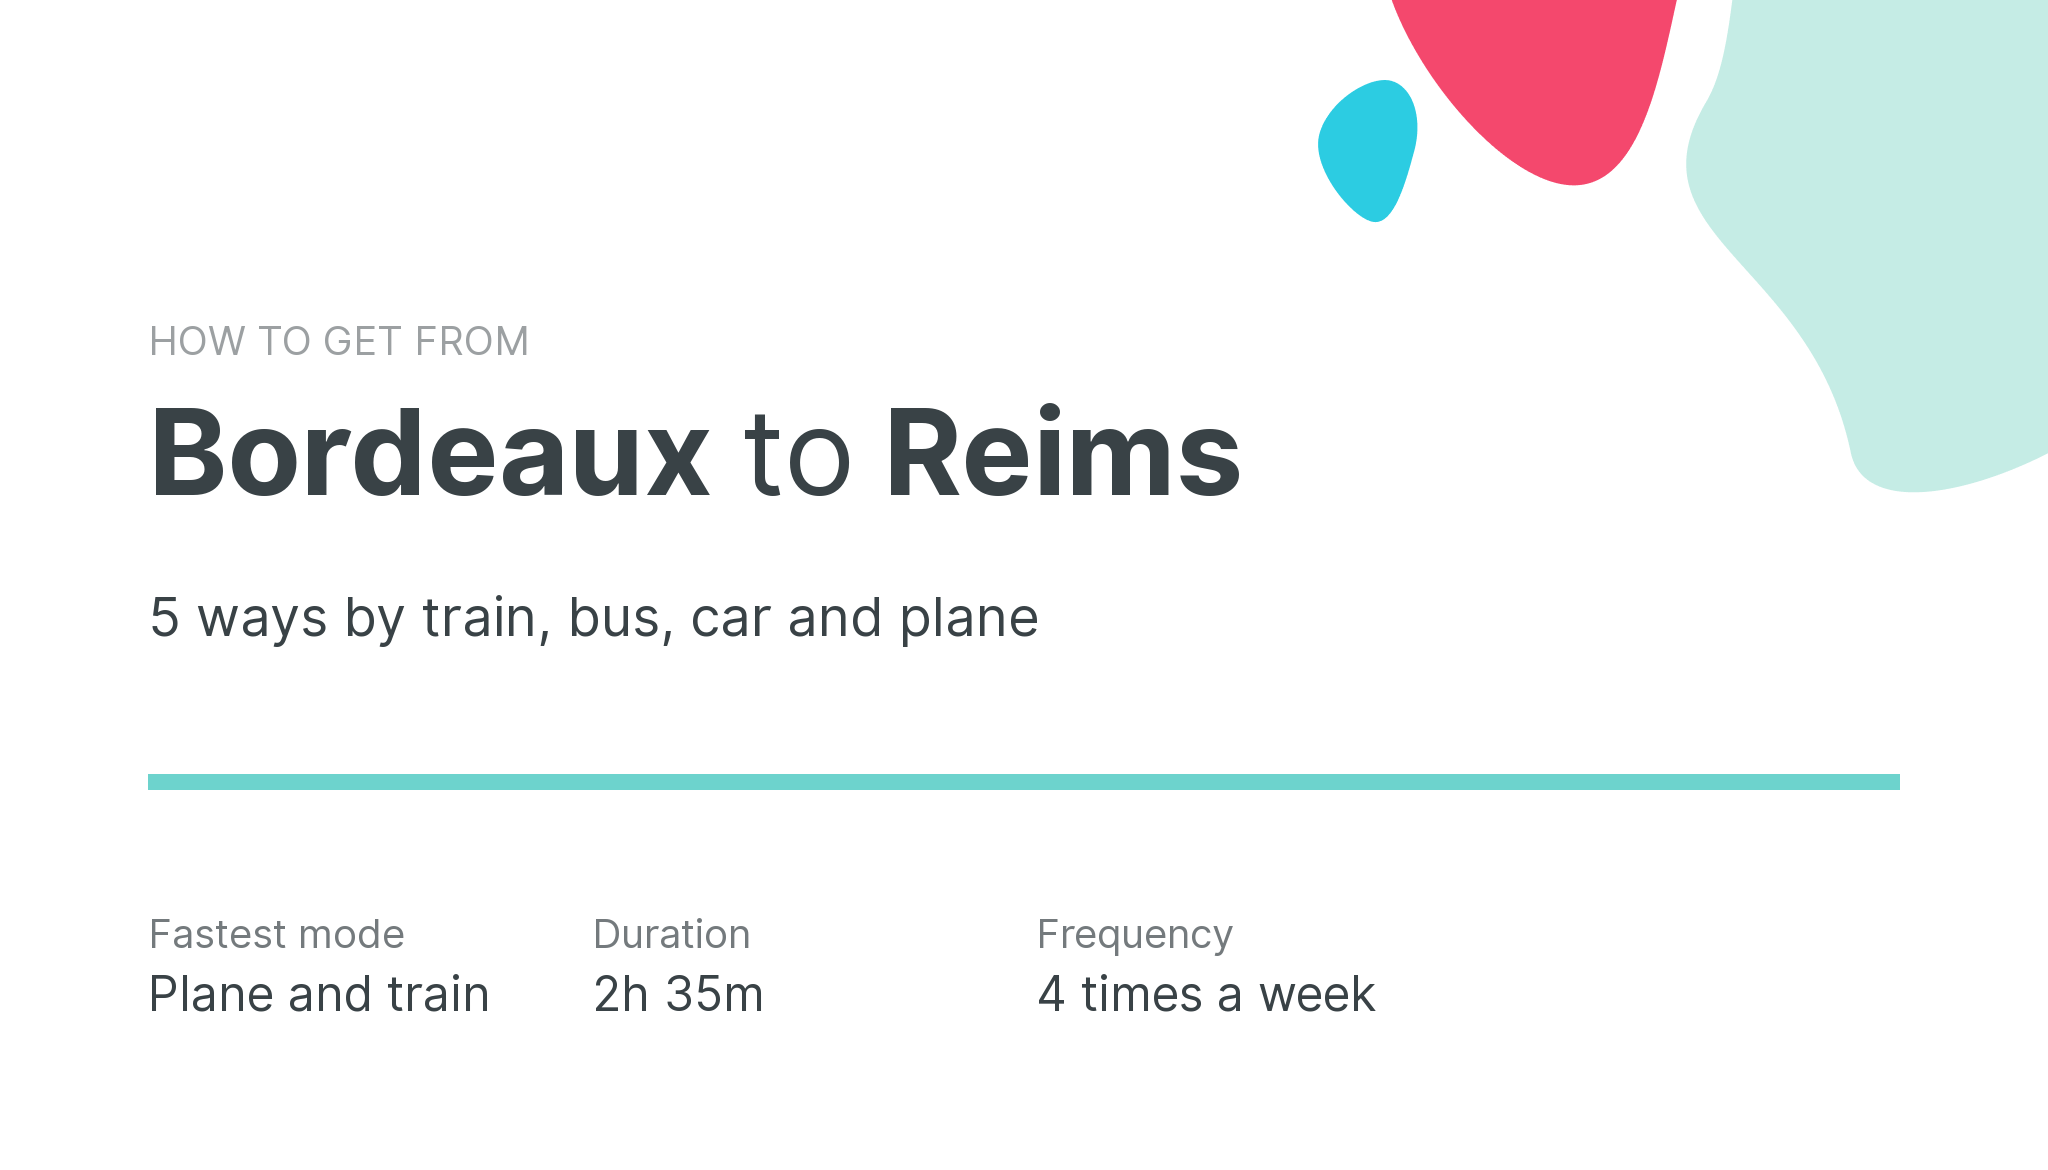 How do I get from Bordeaux to Reims